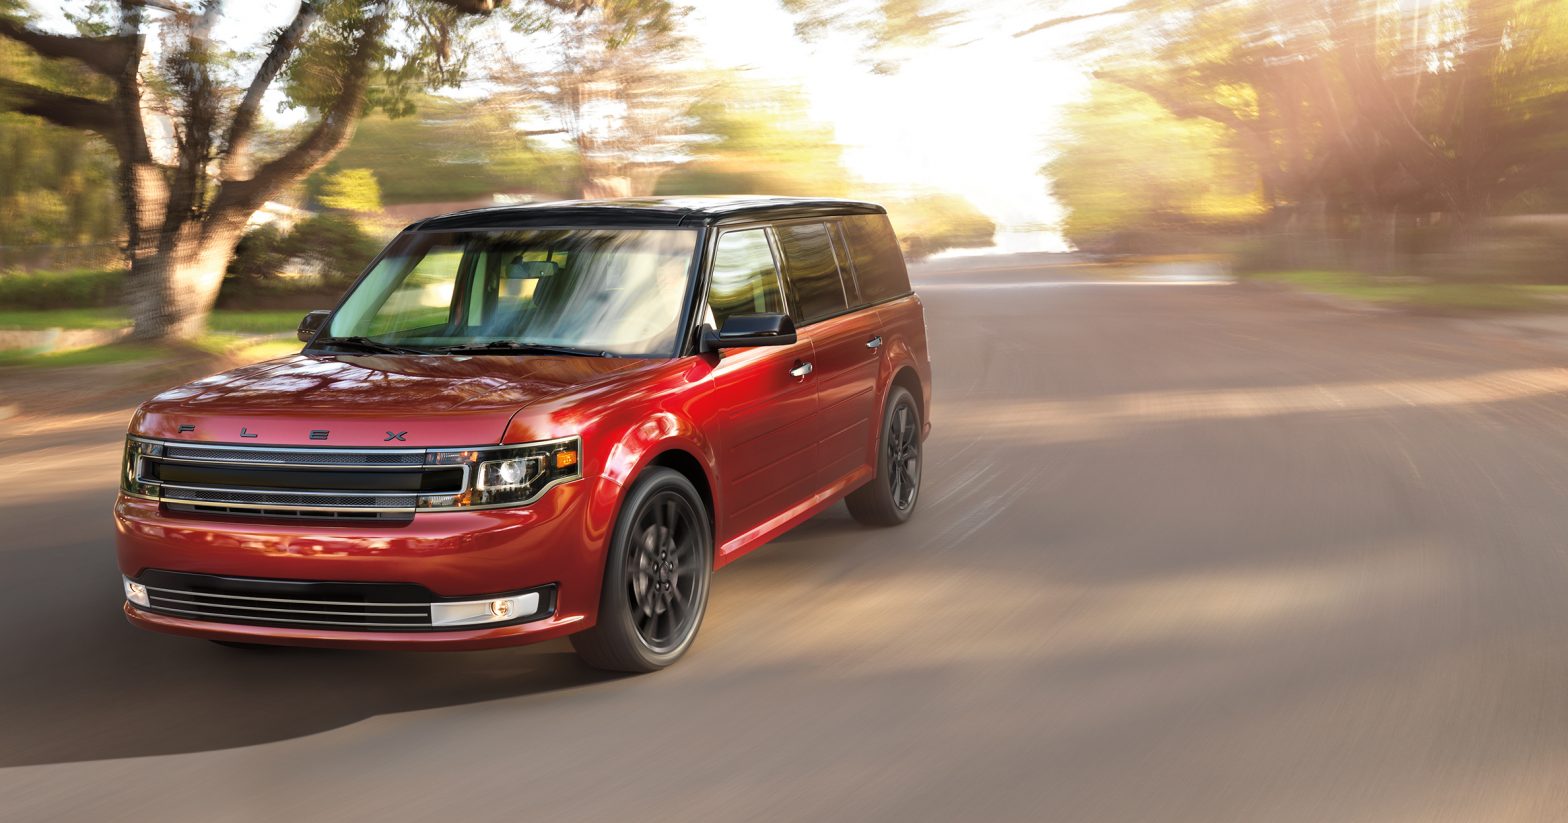 Ford Flex Wins 2022 Best CPO Value Award In Large SUV Category